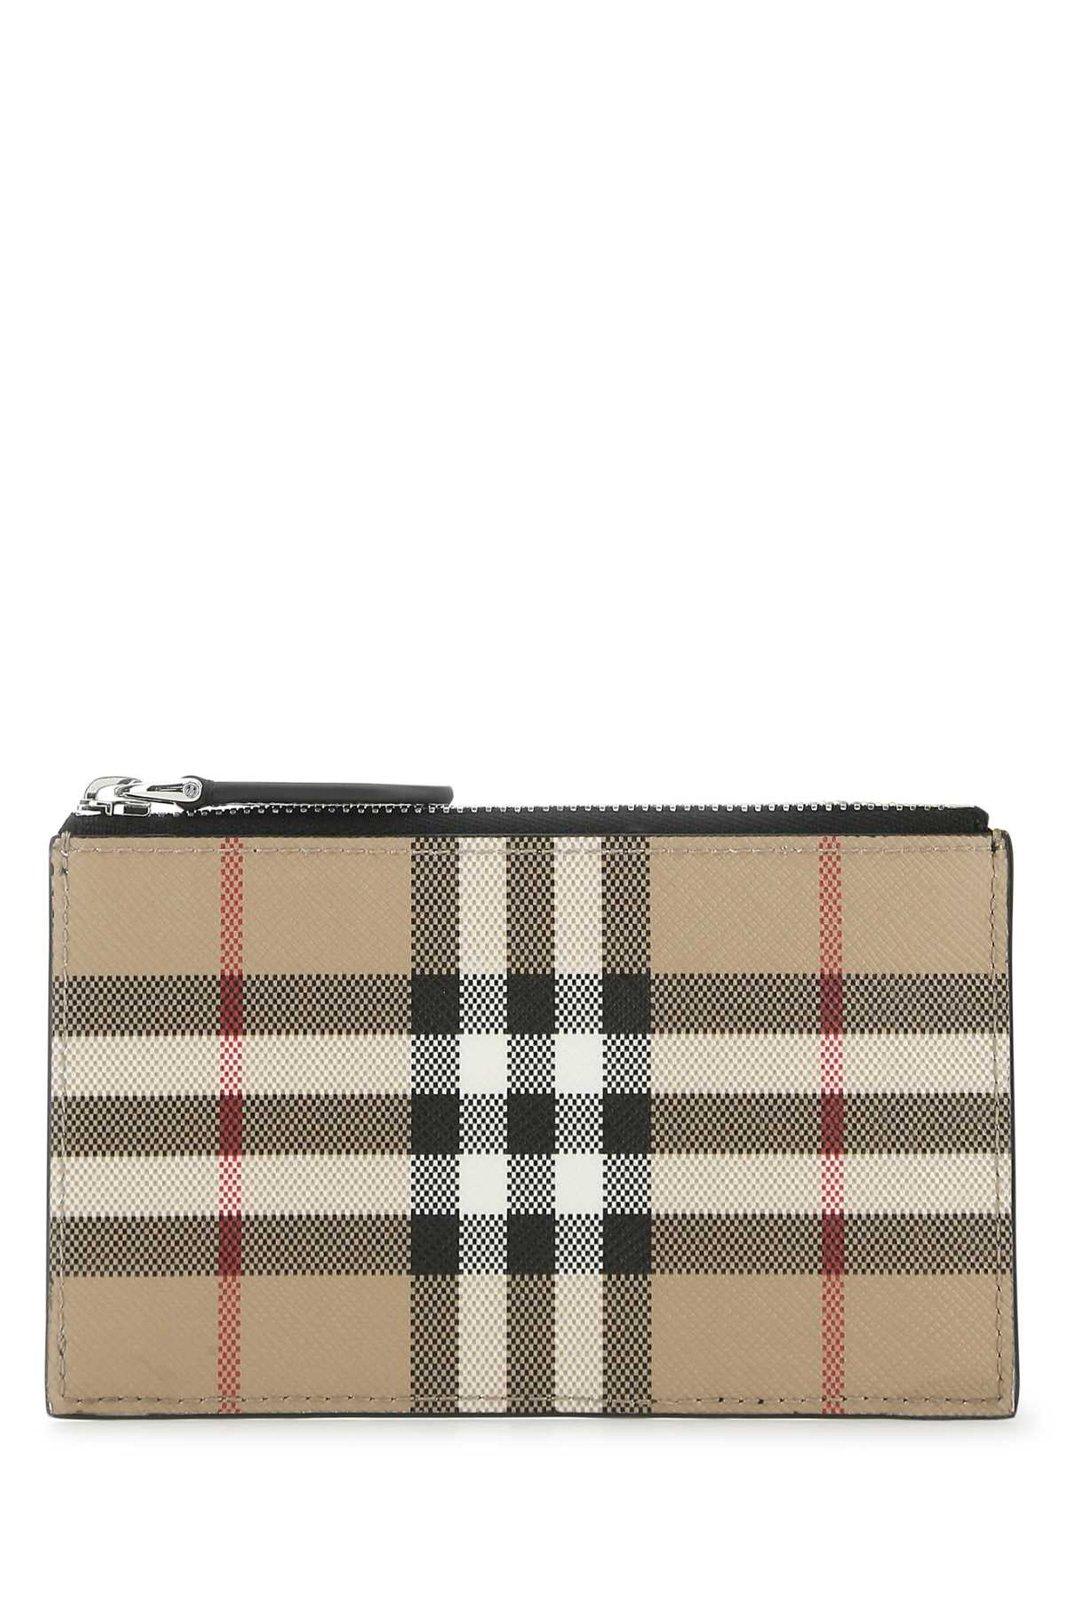 Burberry Vintage Check Zipped Card Case